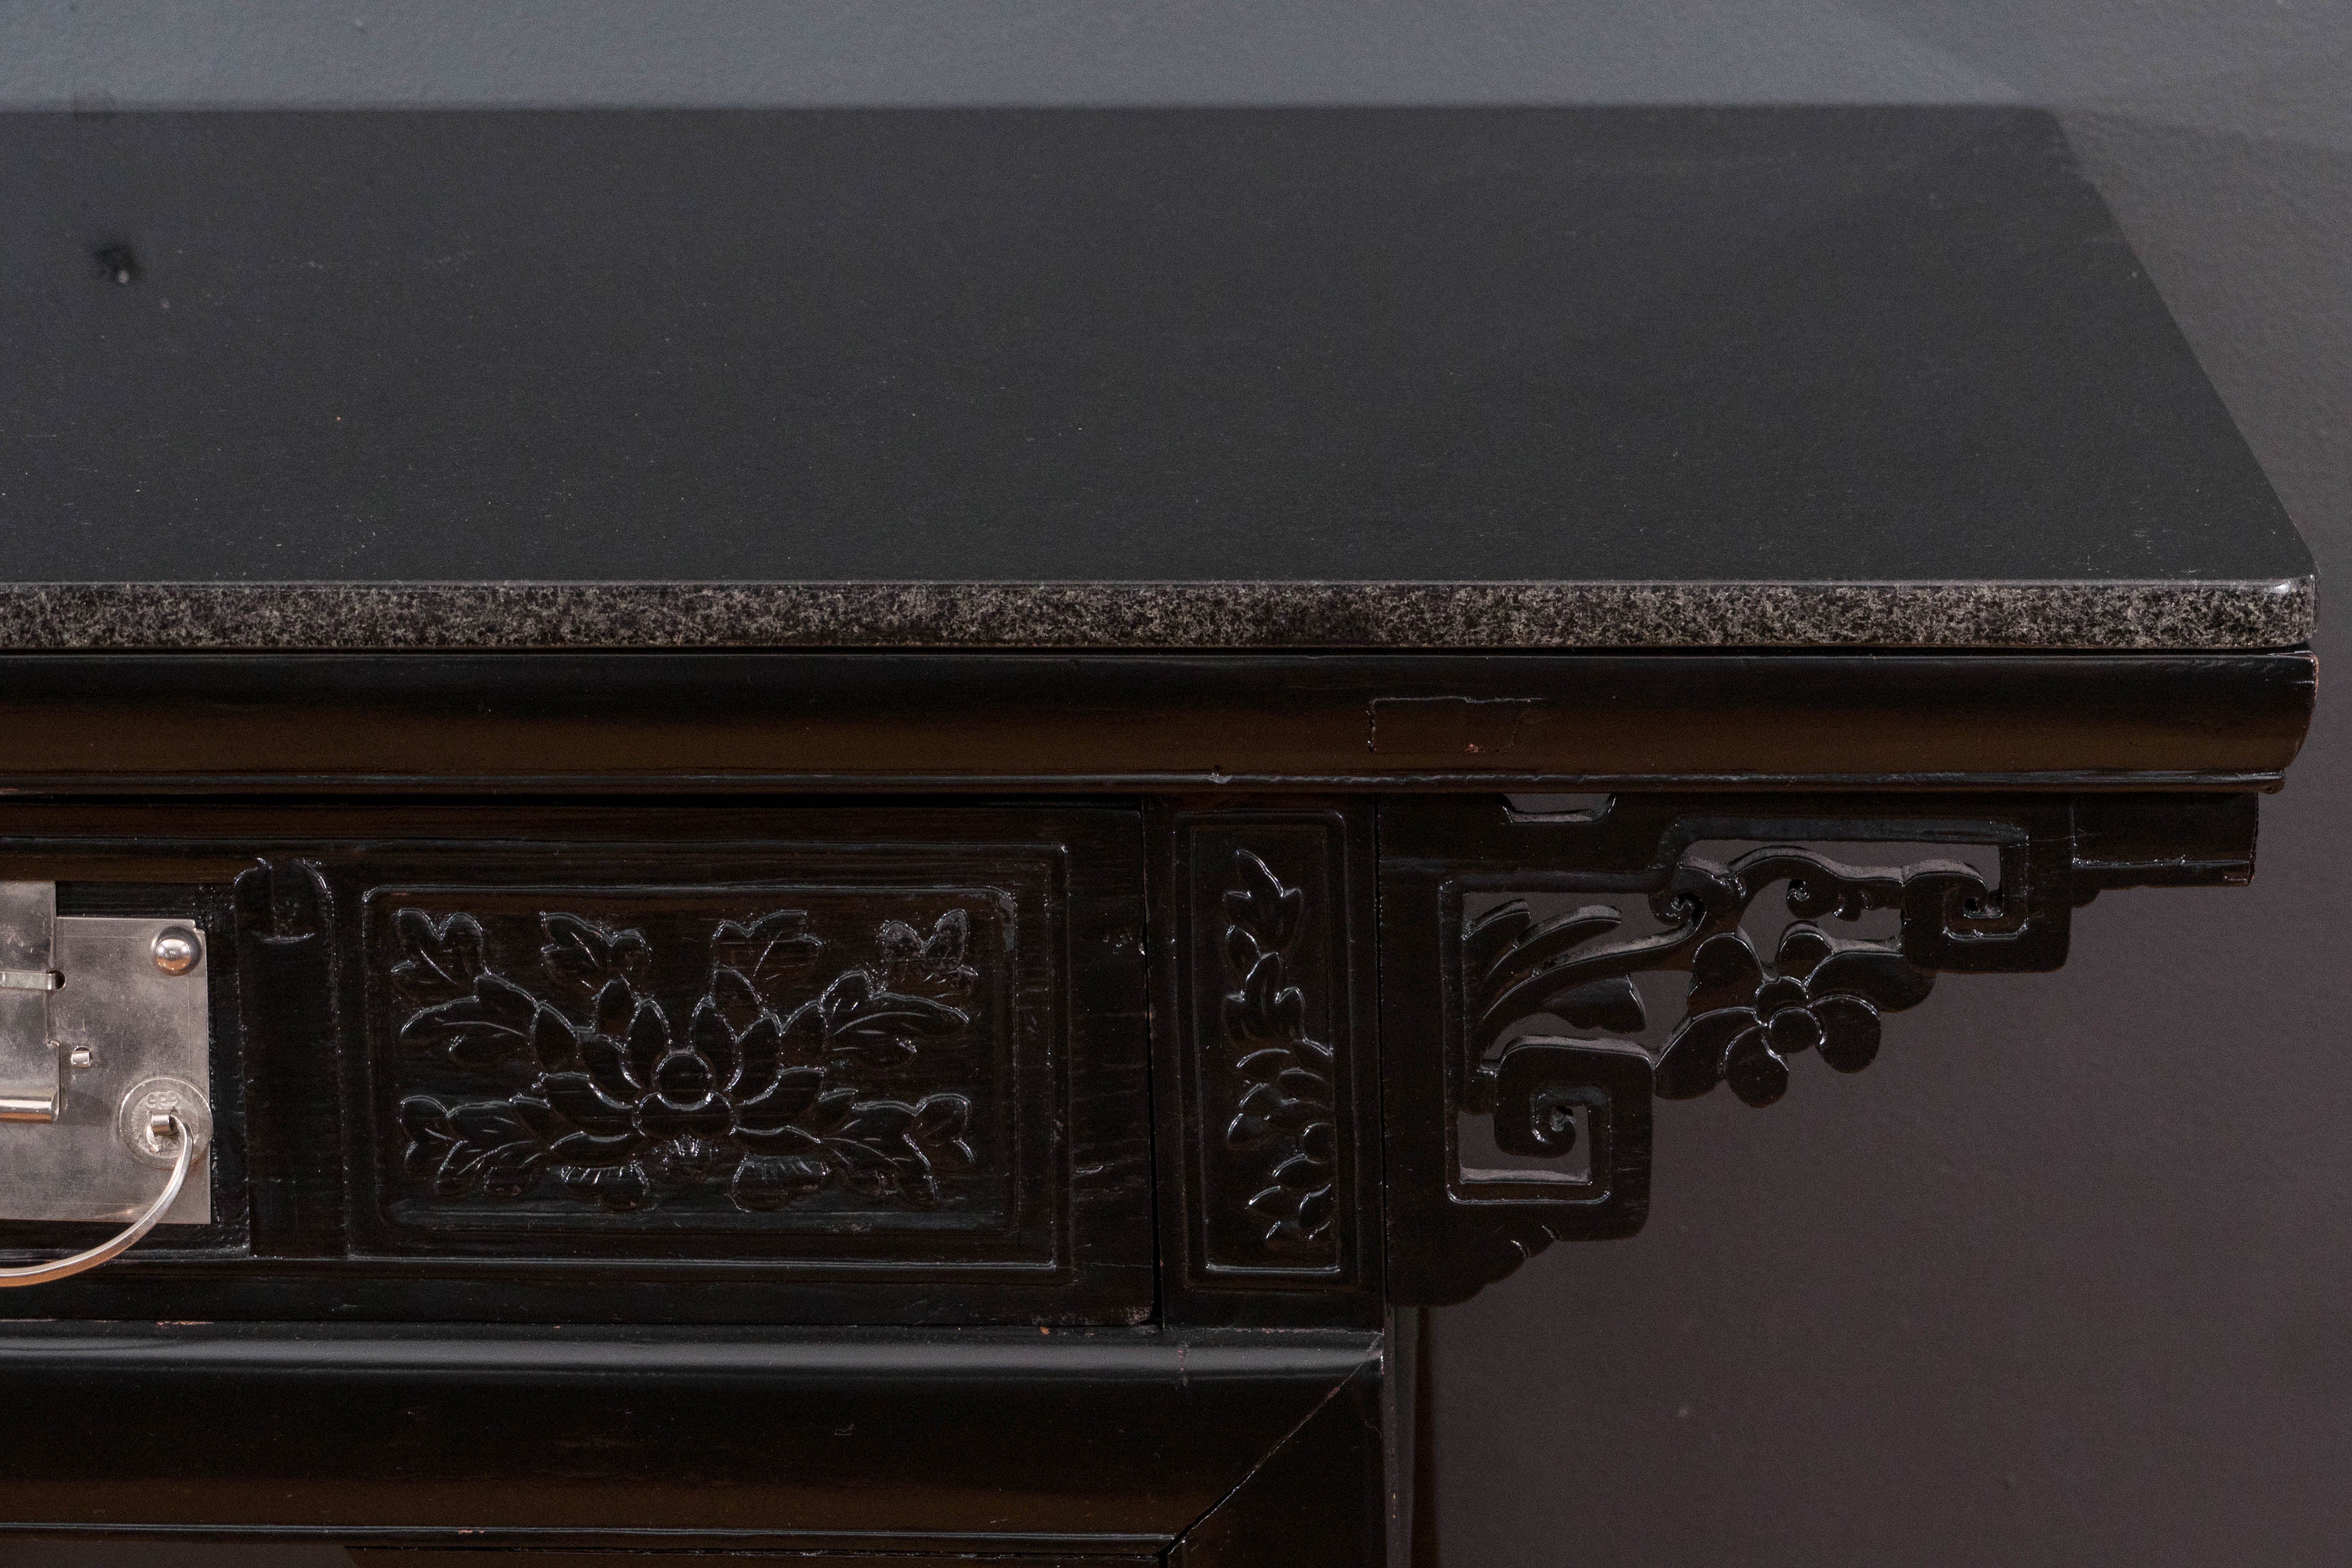 Chinese Export 19th Century Black Lacquer Chinese Alter Table